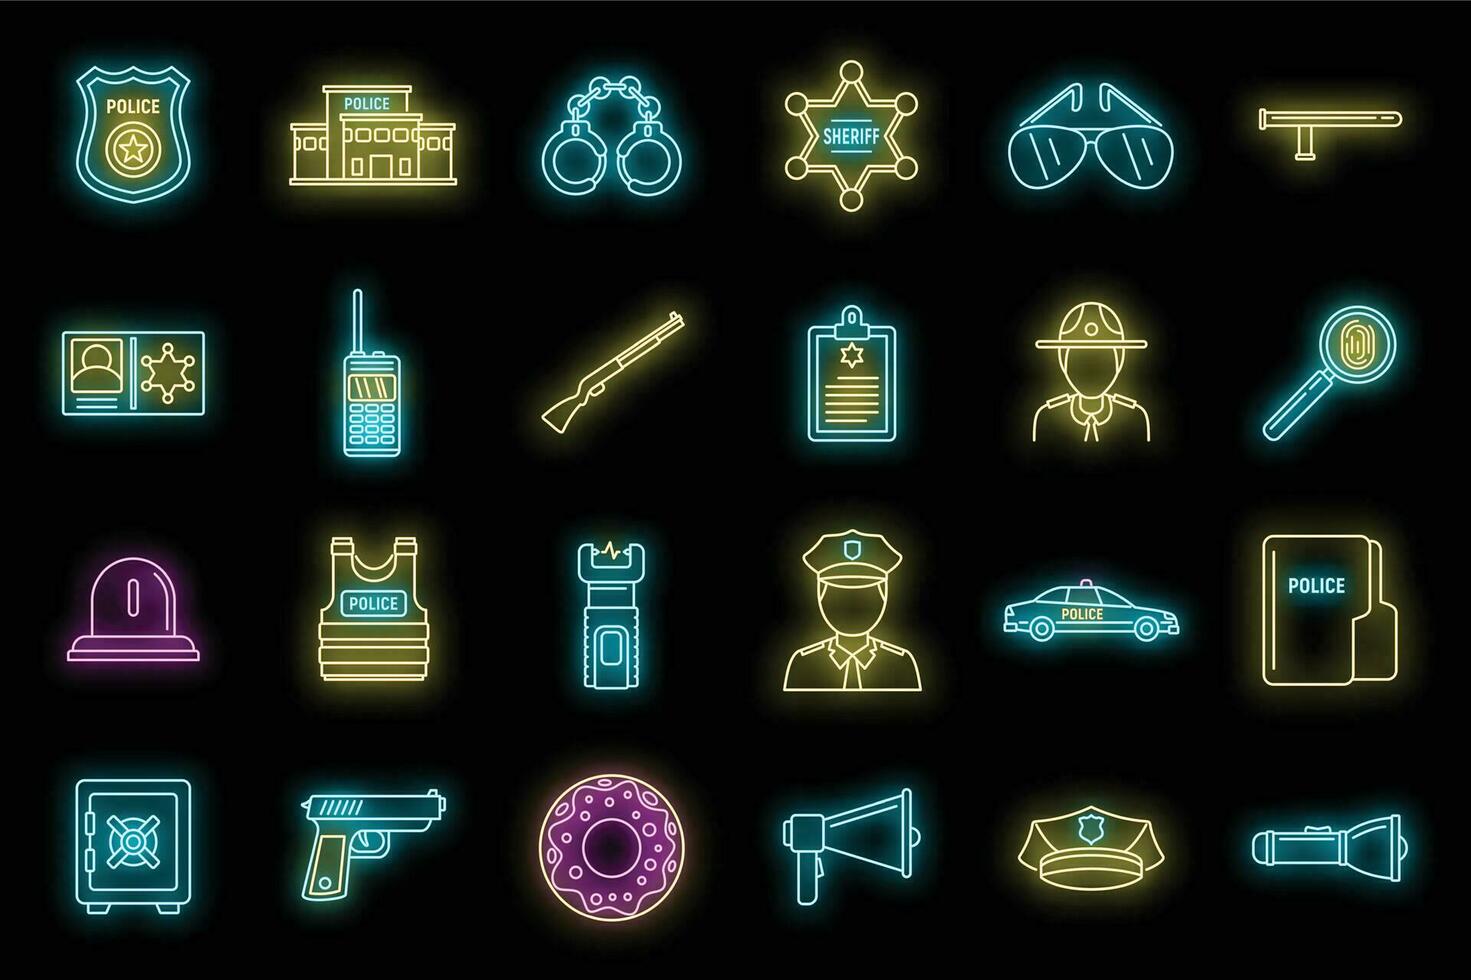 Police station equipment icons set vector neon